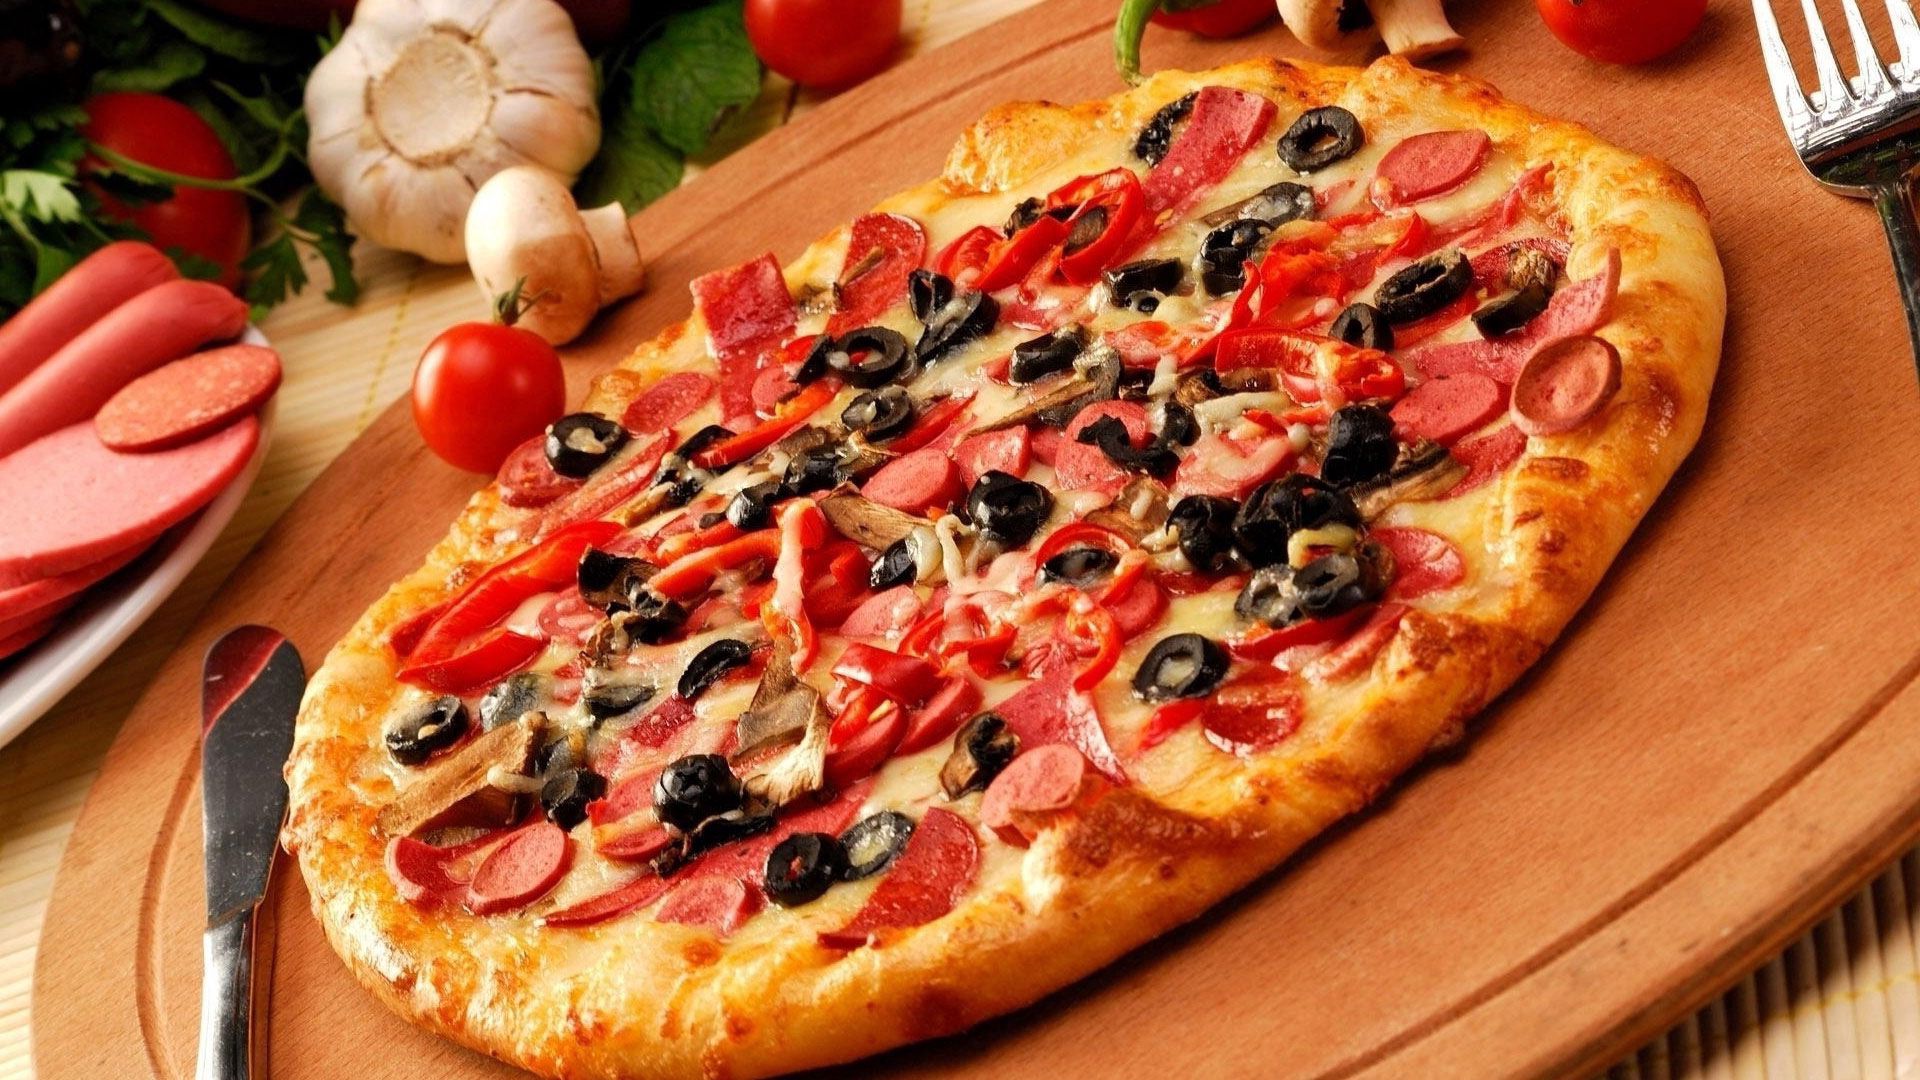 pizza, bakery products, food, baking, fork, knife Full HD